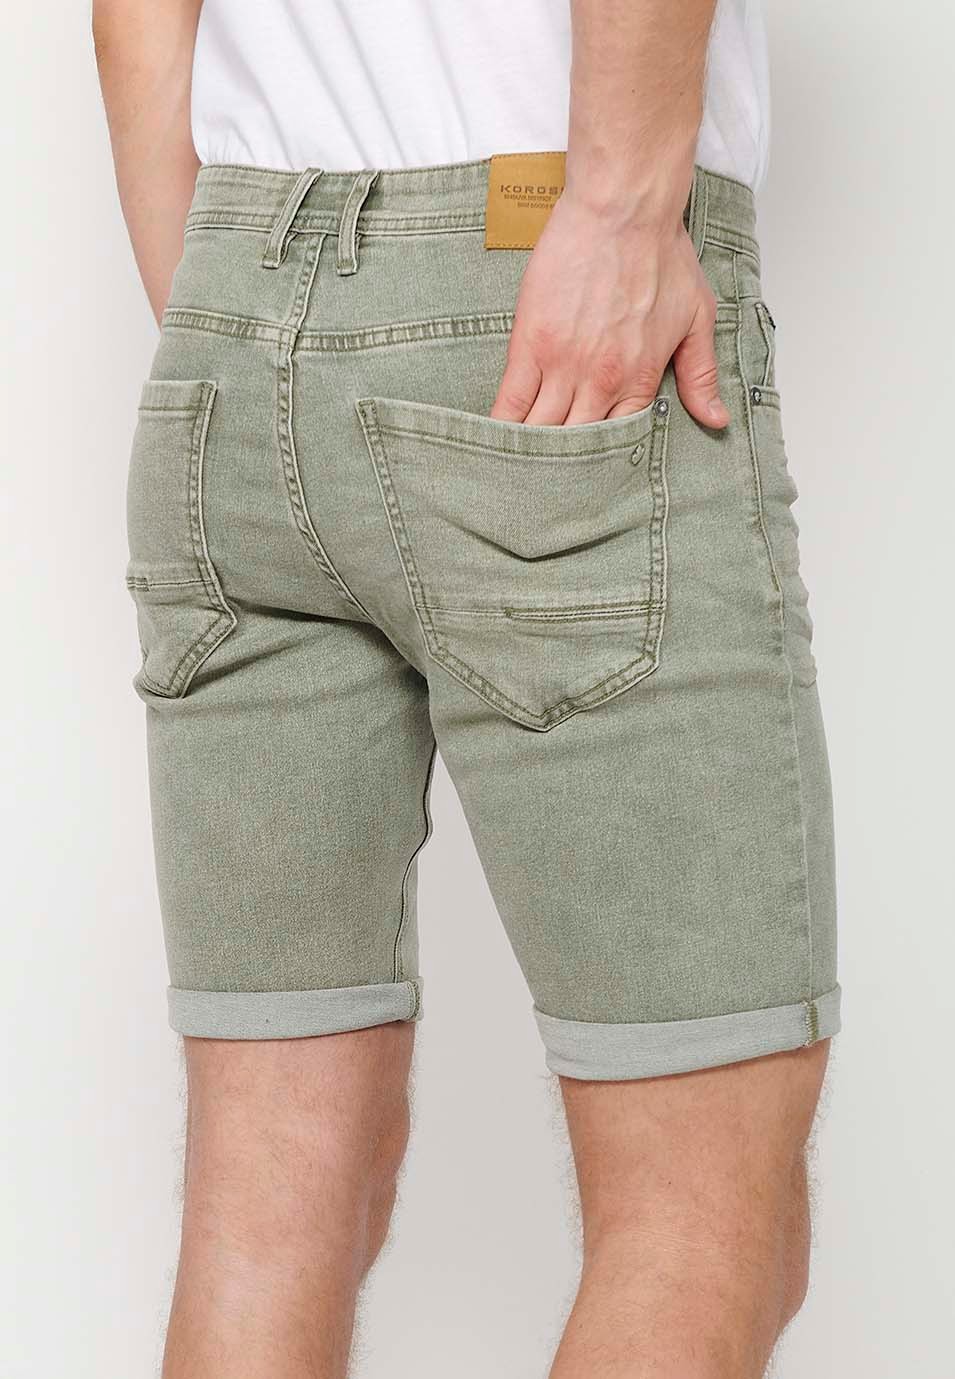 Shorts with a turn-up finish with front zipper and button closure and five pockets, one with a match pocket, in Green for Men 2